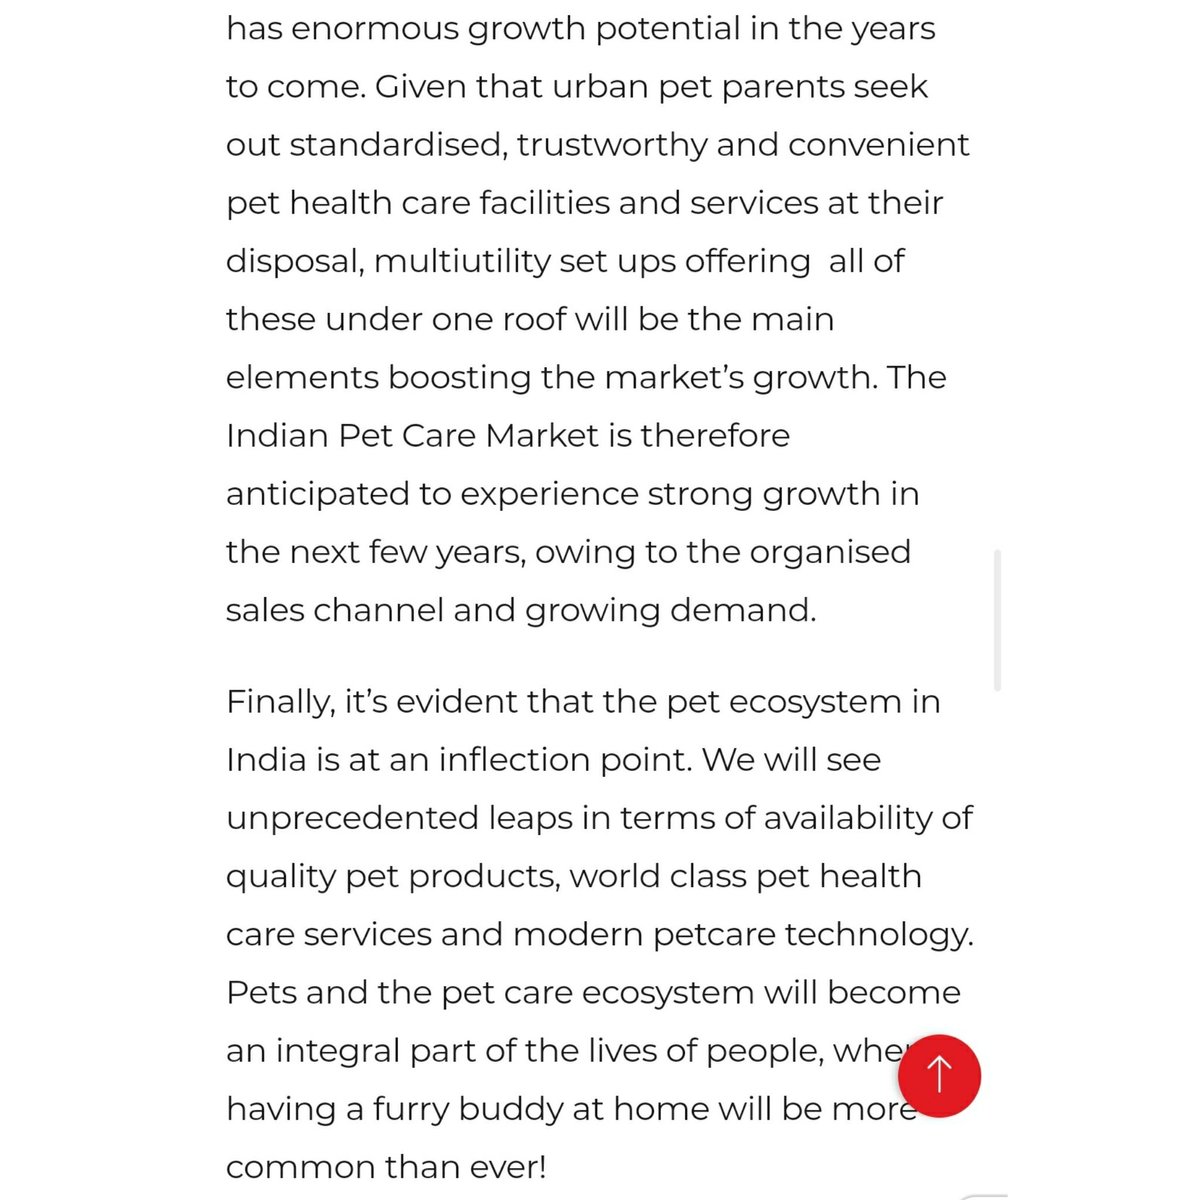 In this article Gaurav Ajmera, Founder of petcare startup Vetic talks about the growing trend of pet adoption and decodes the subsequent factors responsible for India’s growing pet healthcare industry. @timesofindia

#Startupfunding #fundingnews #petcare #pethealthcare #vetic #PR